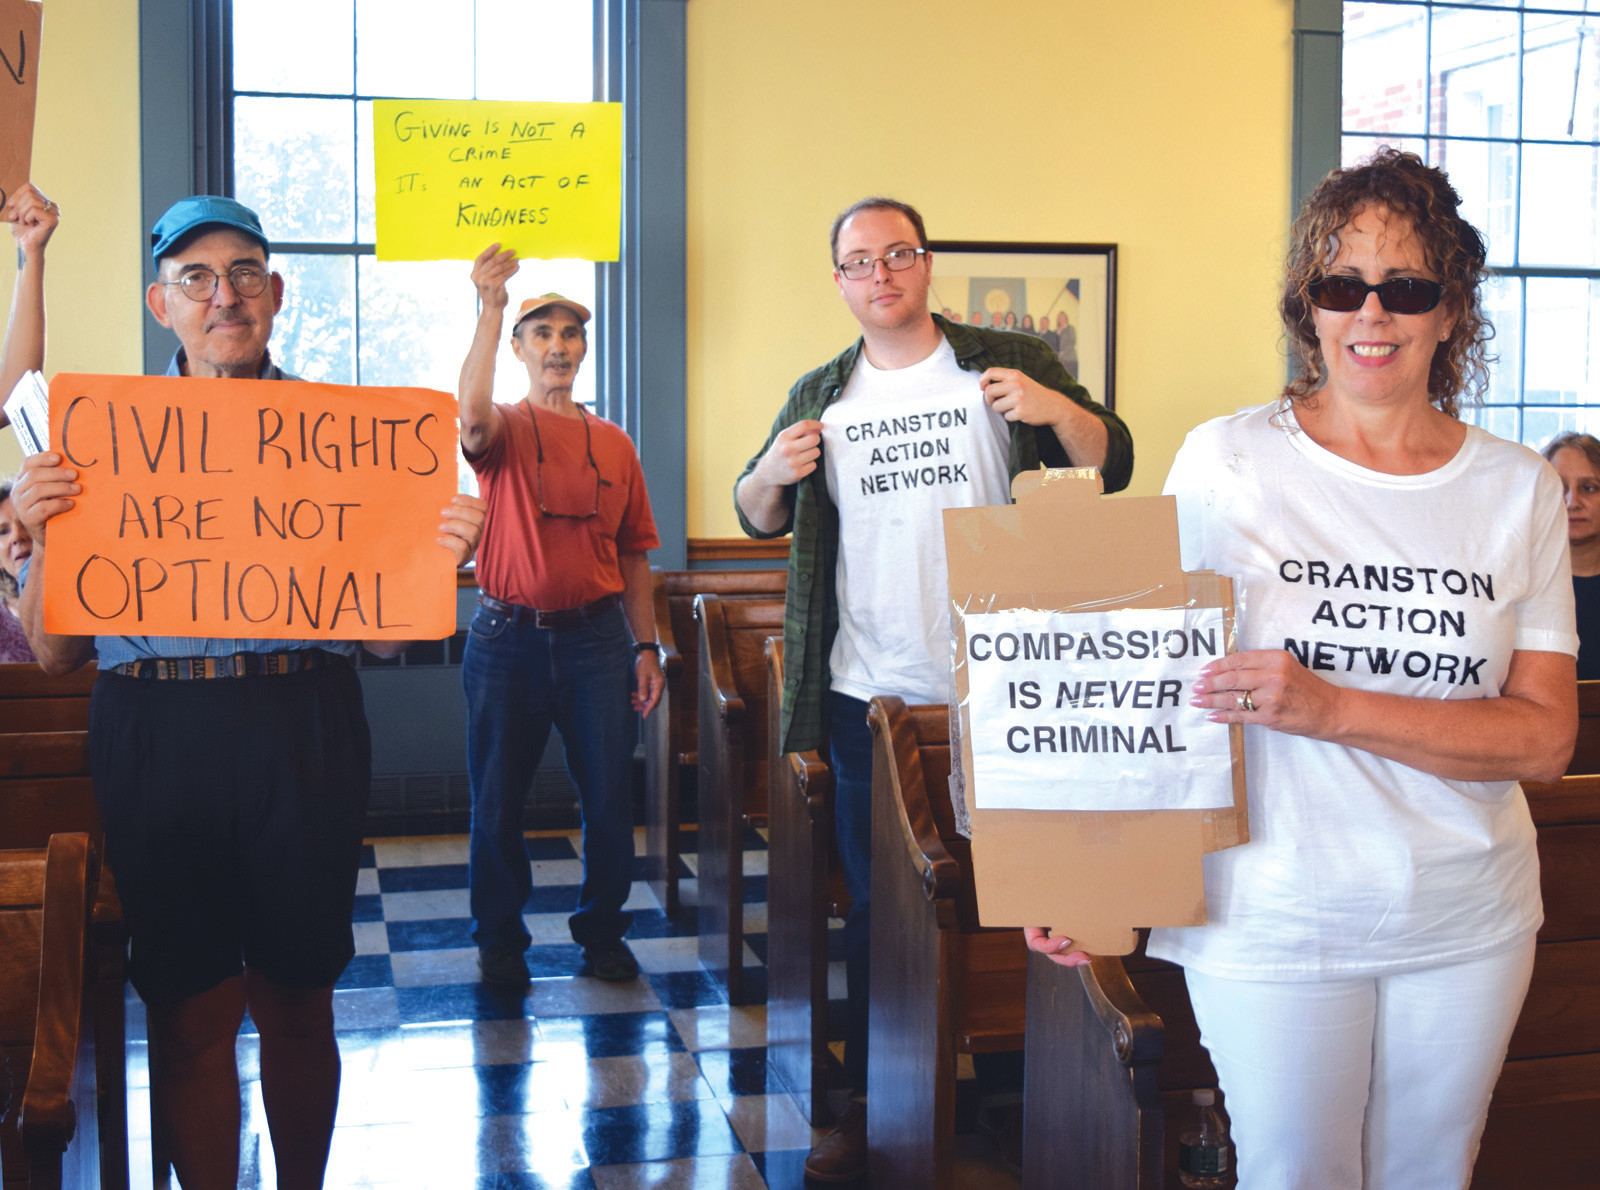 TAKING ACTION: John Donegan, in the middle holding up his shirt, and members of the Cranston Action Network took over the chambers on Thursday as the City Council went into executive session.